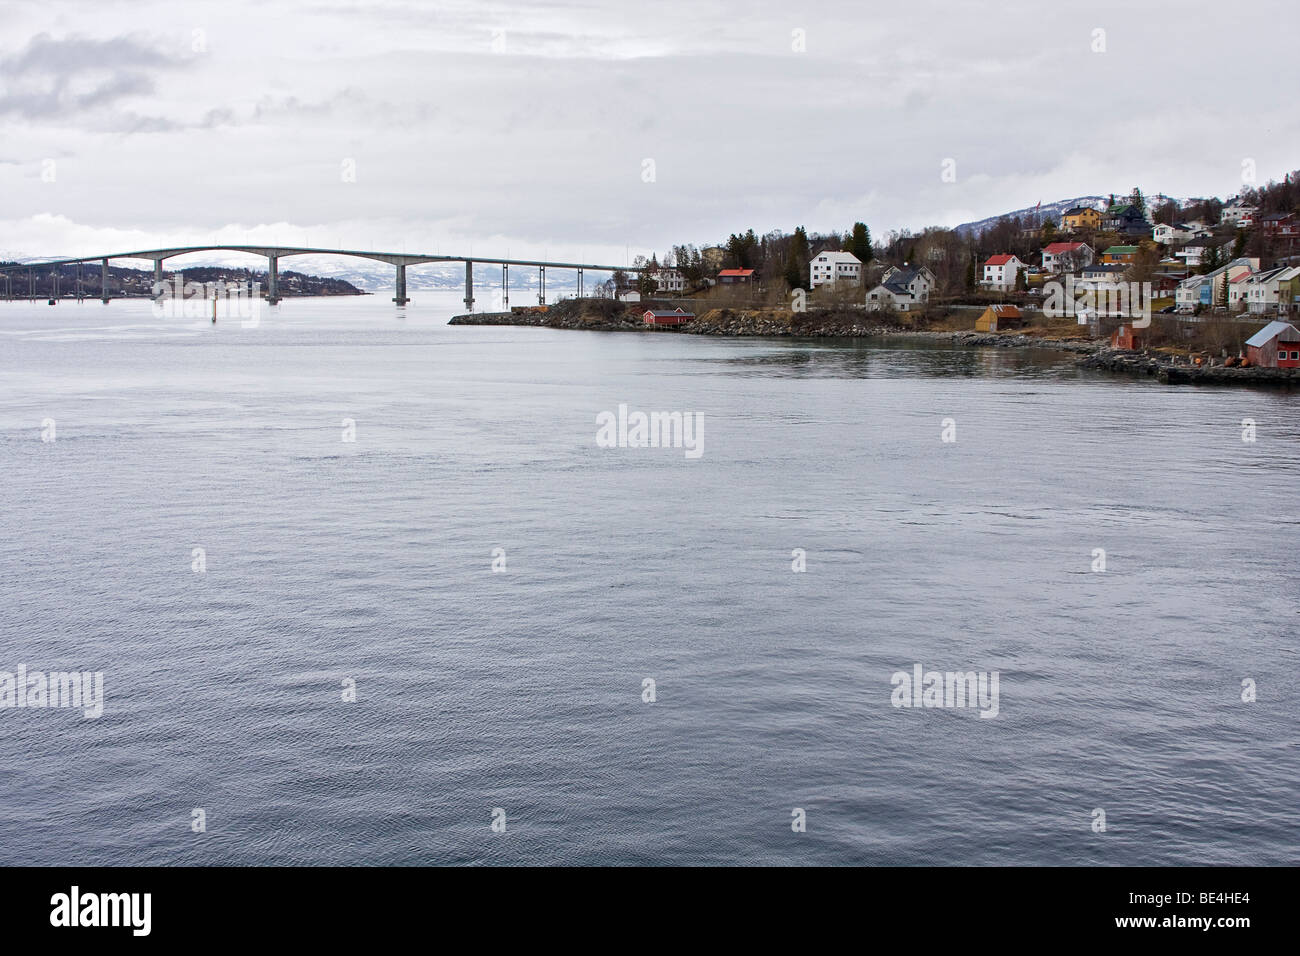 The bridge at Finnsnes, a small town of 5,000 people above the Arctic Circle along Norway's coast. Stock Photo